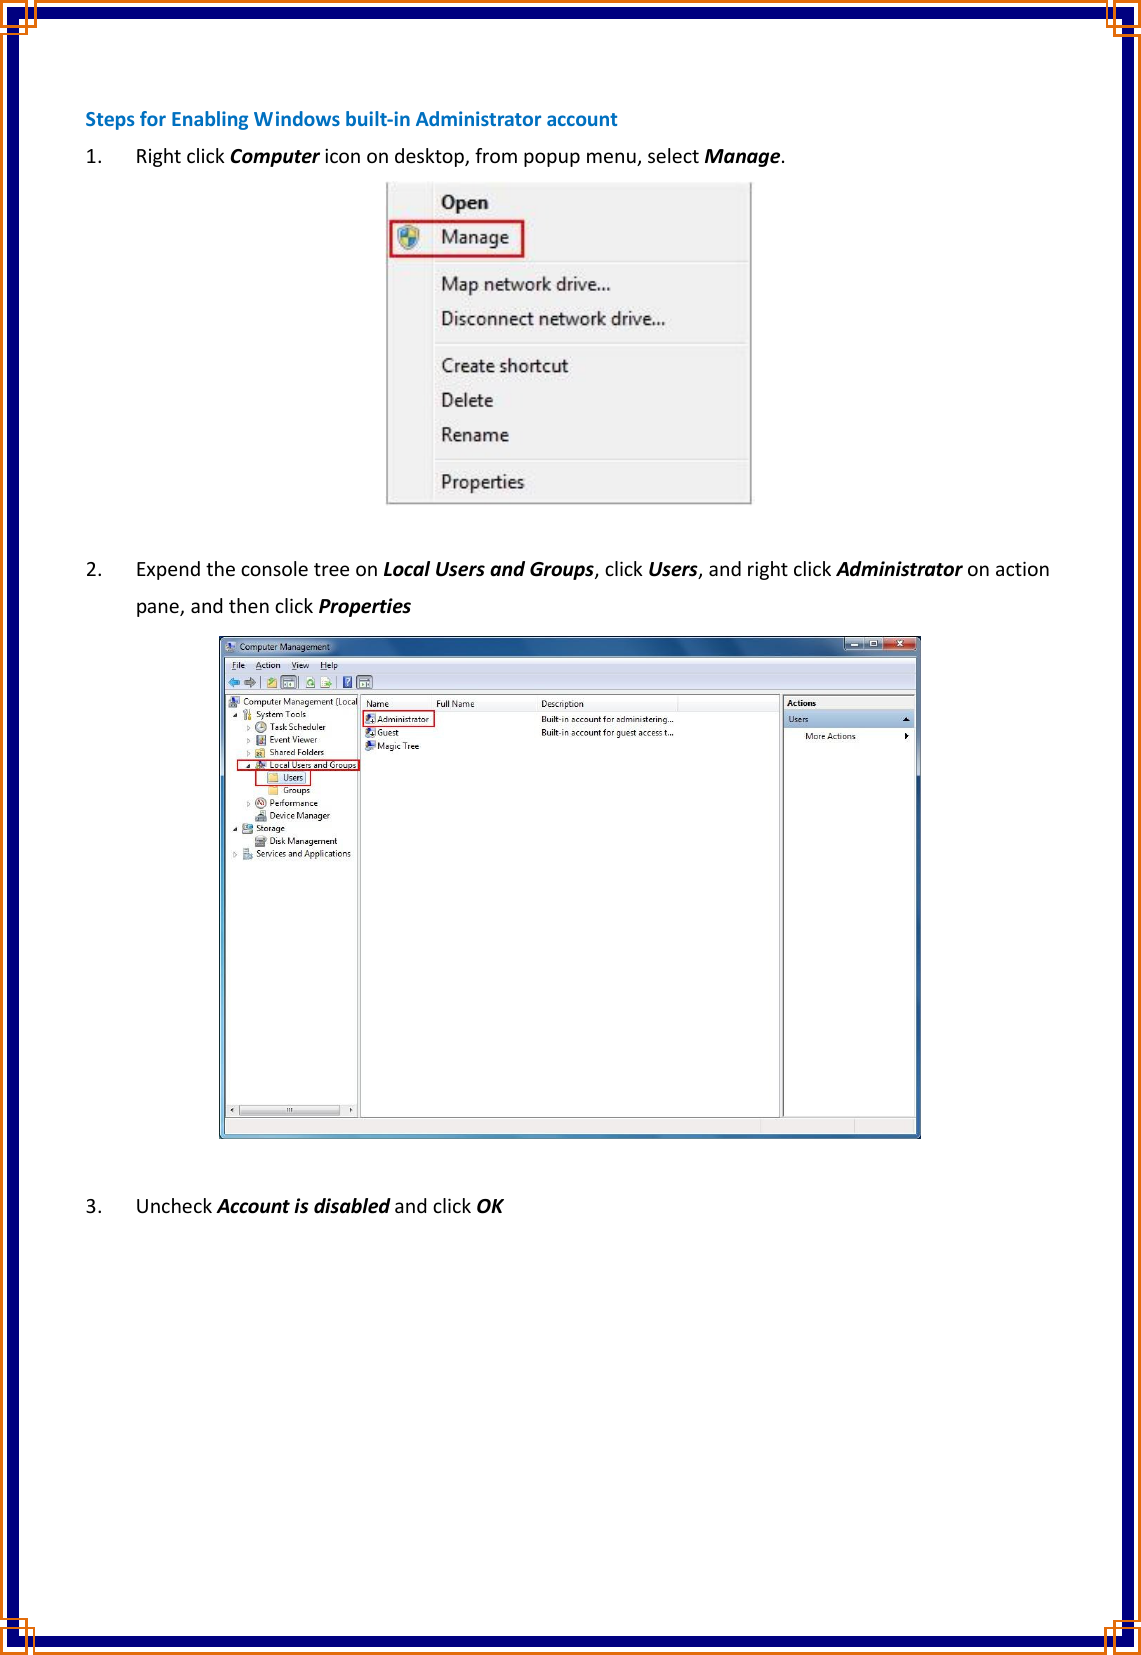 Steps for Enabling Windows built-in Administrator account 1. Right click Computer icon on desktop, from popup menu, select Manage.   2. Expend the console tree on Local Users and Groups, click Users, and right click Administrator on action pane, and then click Properties   3. Uncheck Account is disabled and click OK 